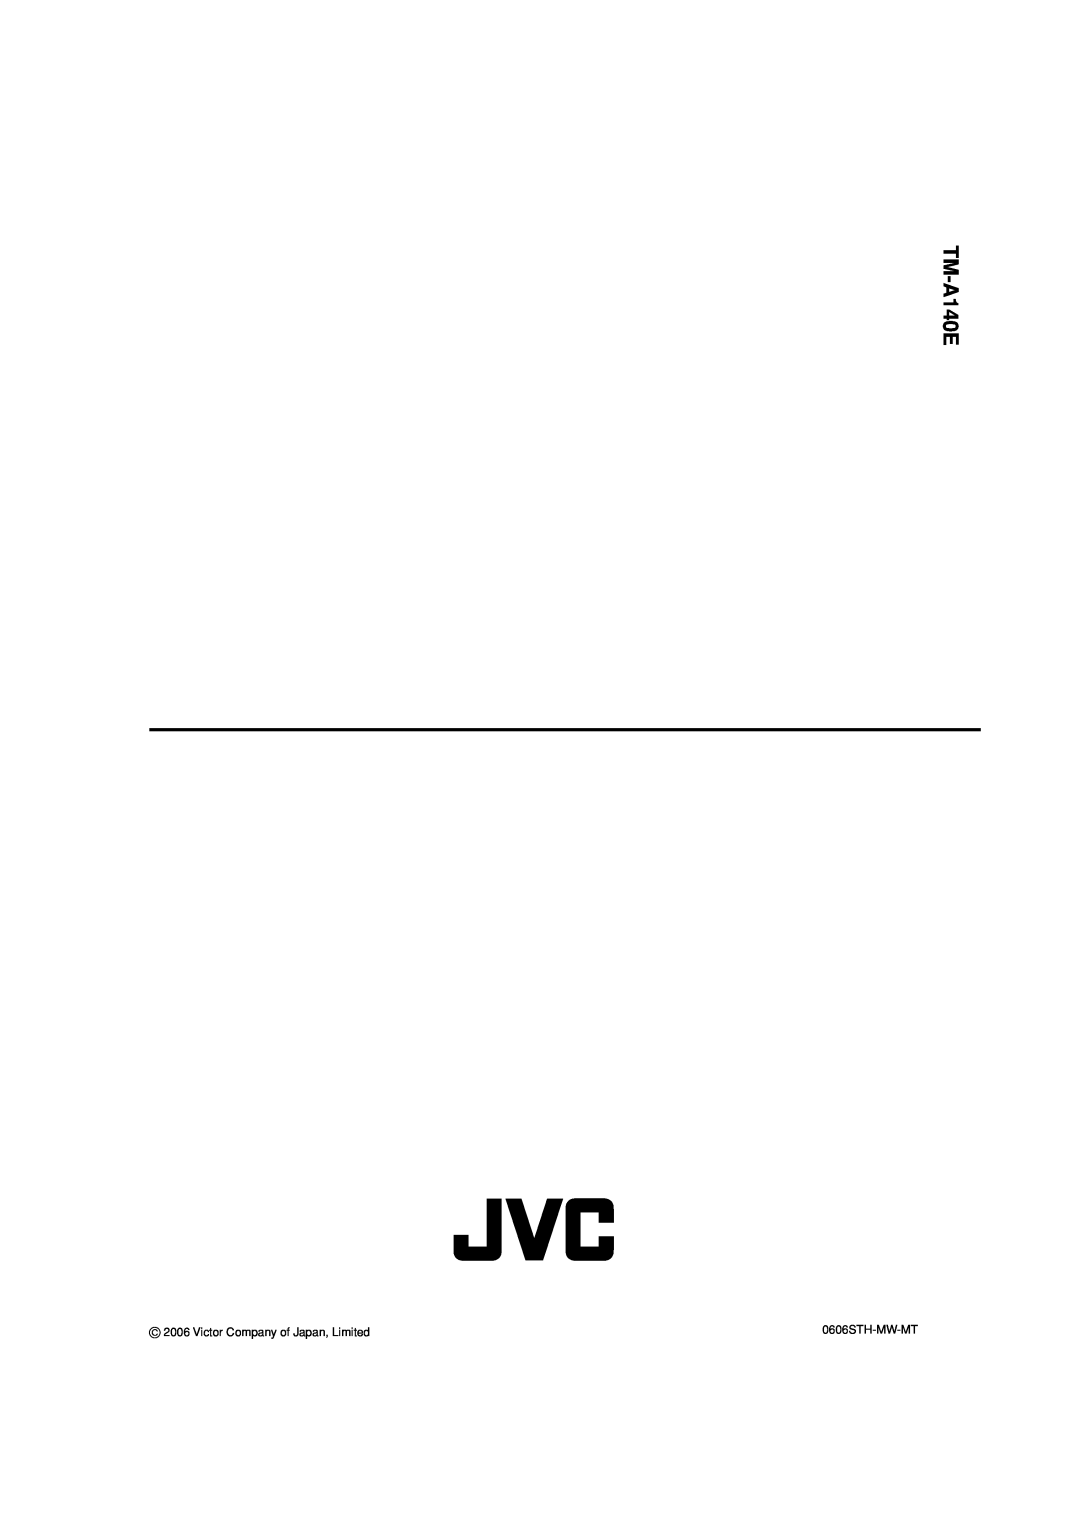 JVC LCT2142-001A-H manual TM-A140E, Victor Company of Japan, Limited, 0606STH-MW-MT 